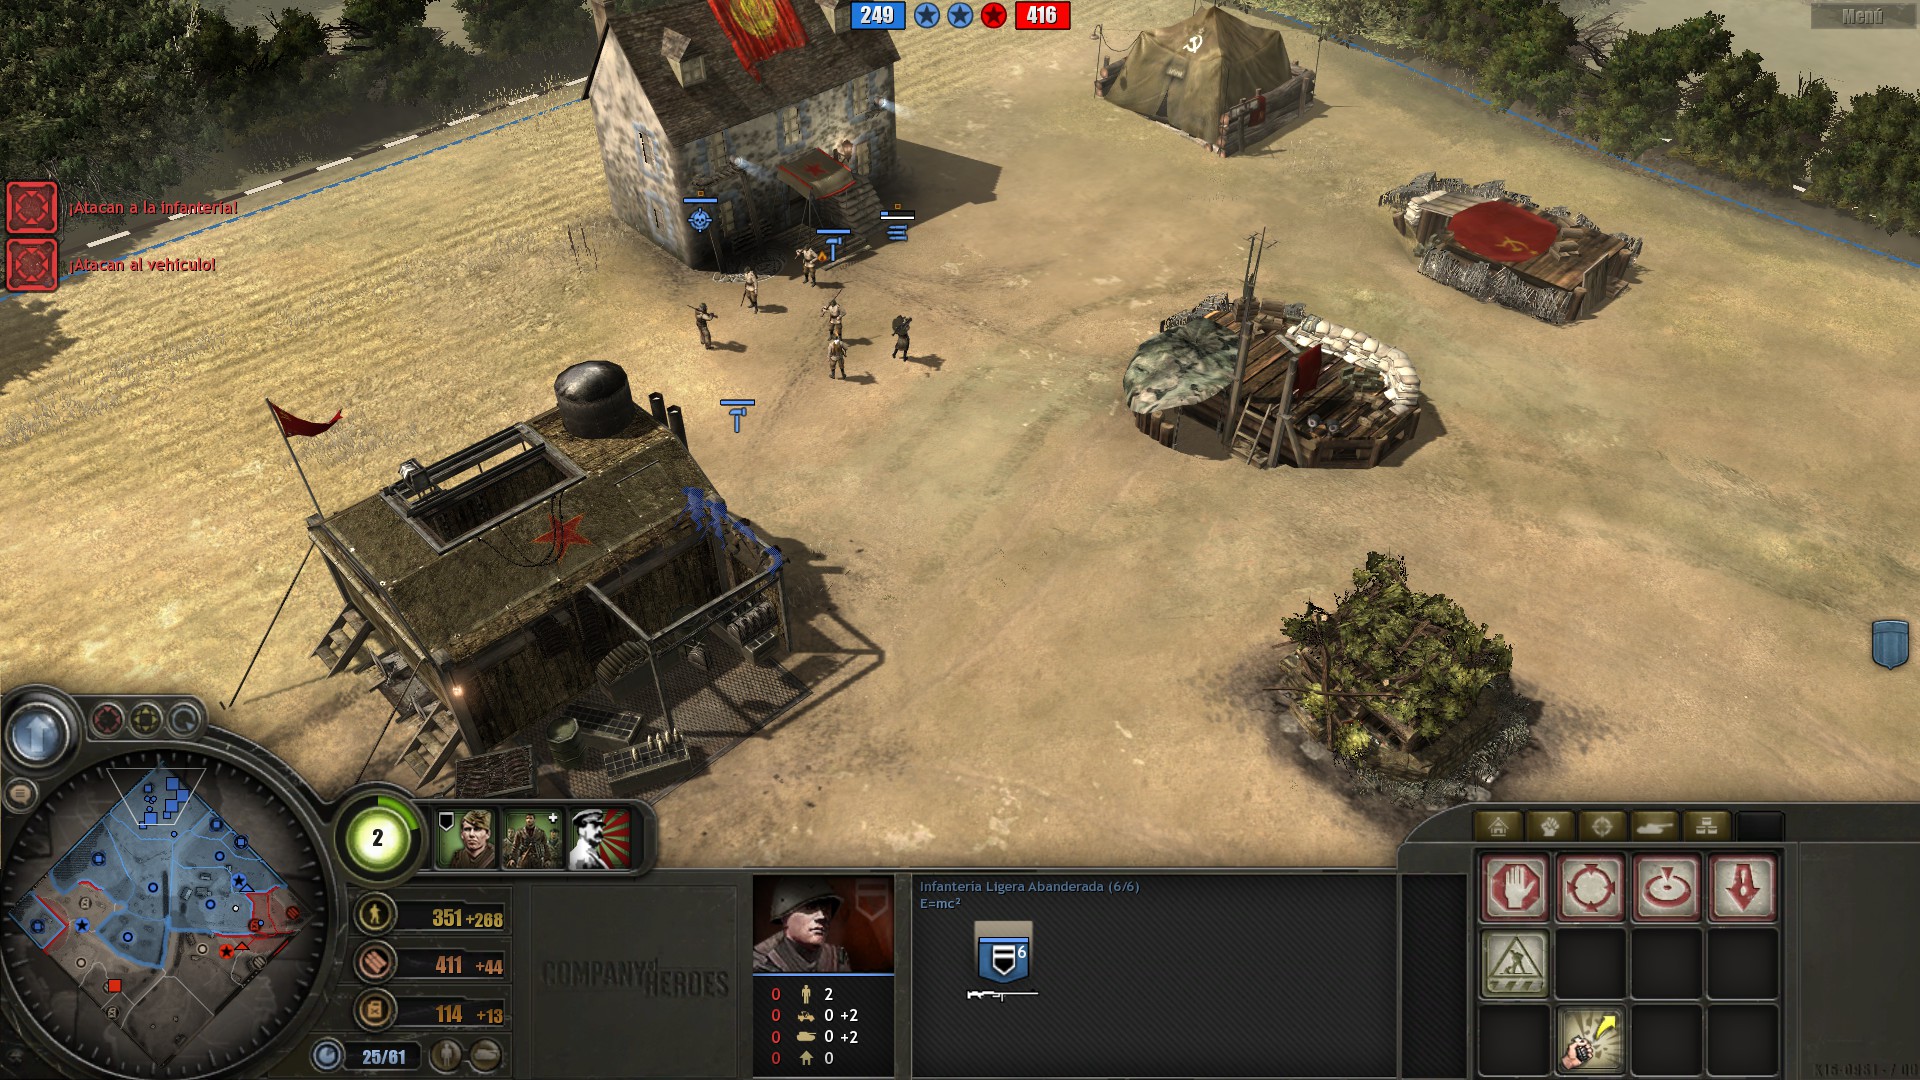 company of heroes 1 product activation